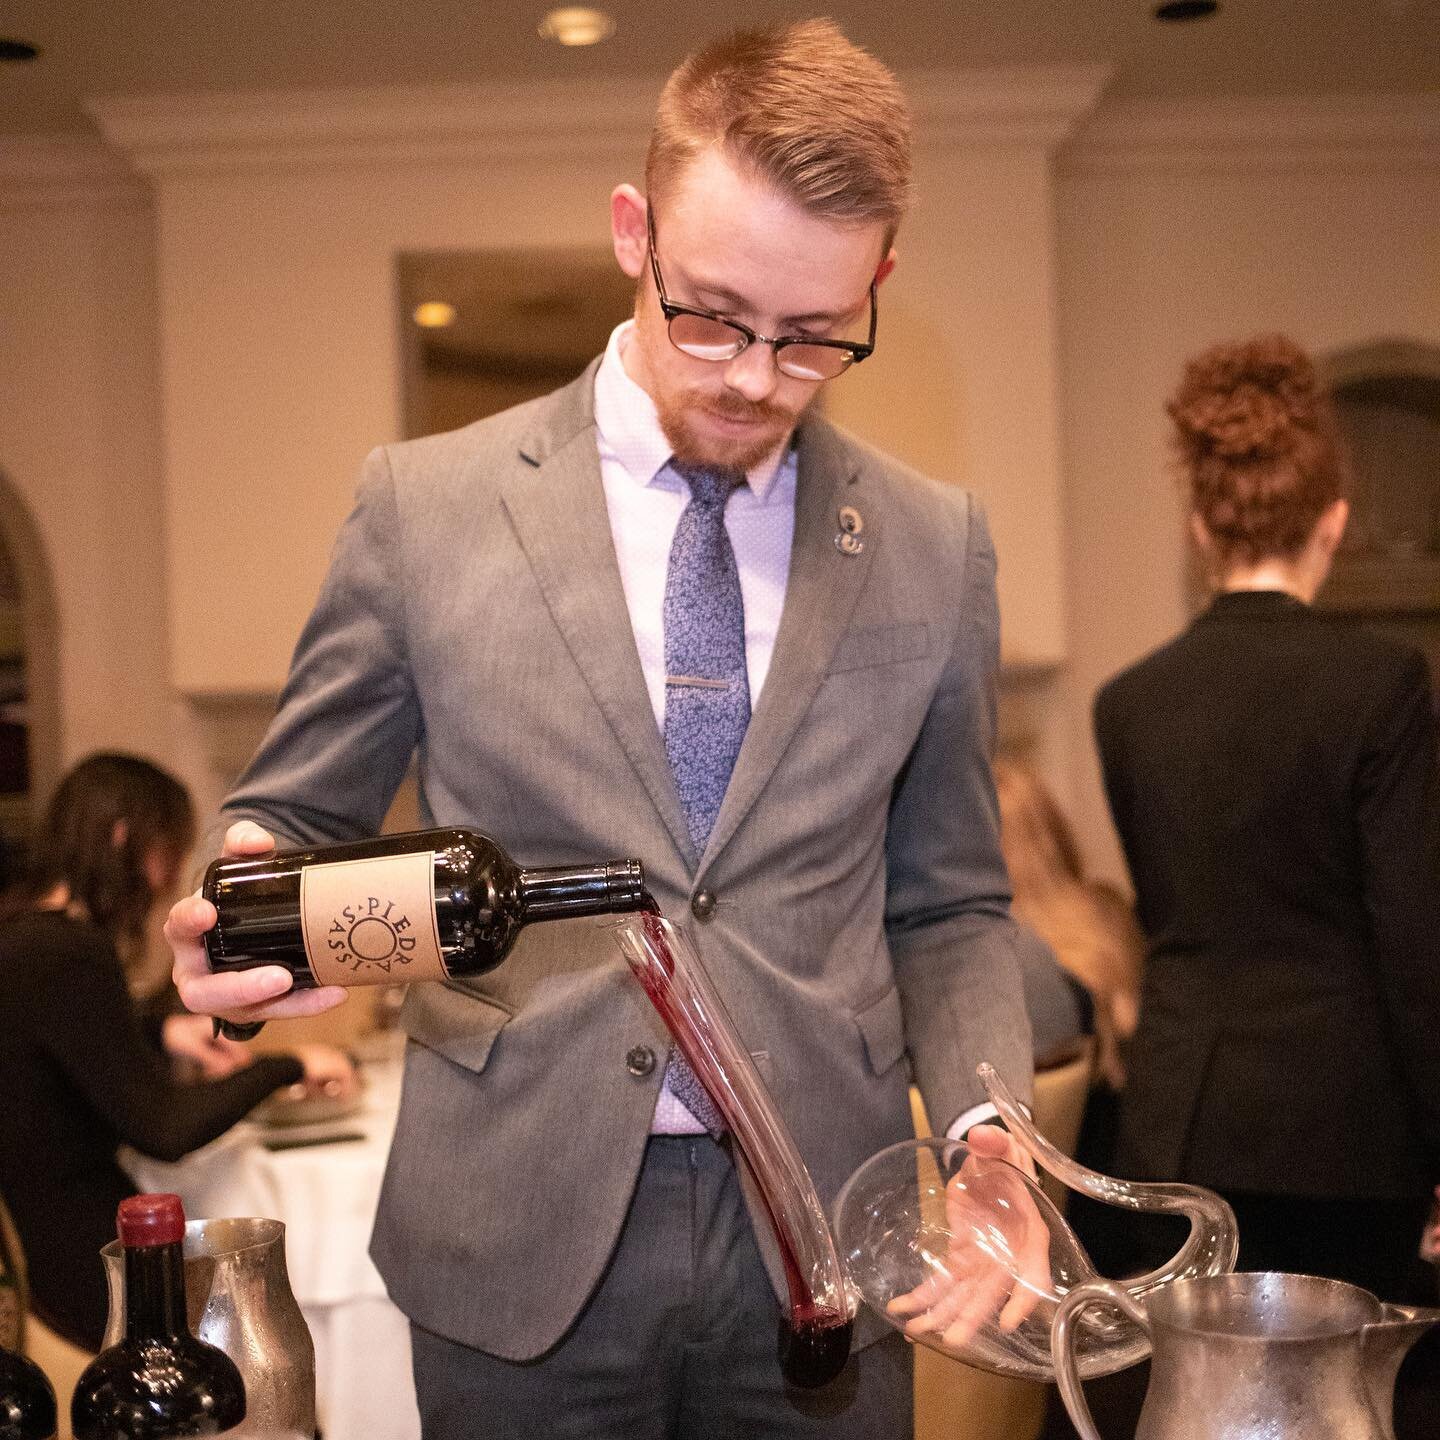 Today is #NationalWineDay or as we like to call it, Thursday.  And our managing partner &amp; head sommelier @joshturo is ready and waiting with selections from our world class multiple award winning wine programs. 

Come down and let Josh choose the